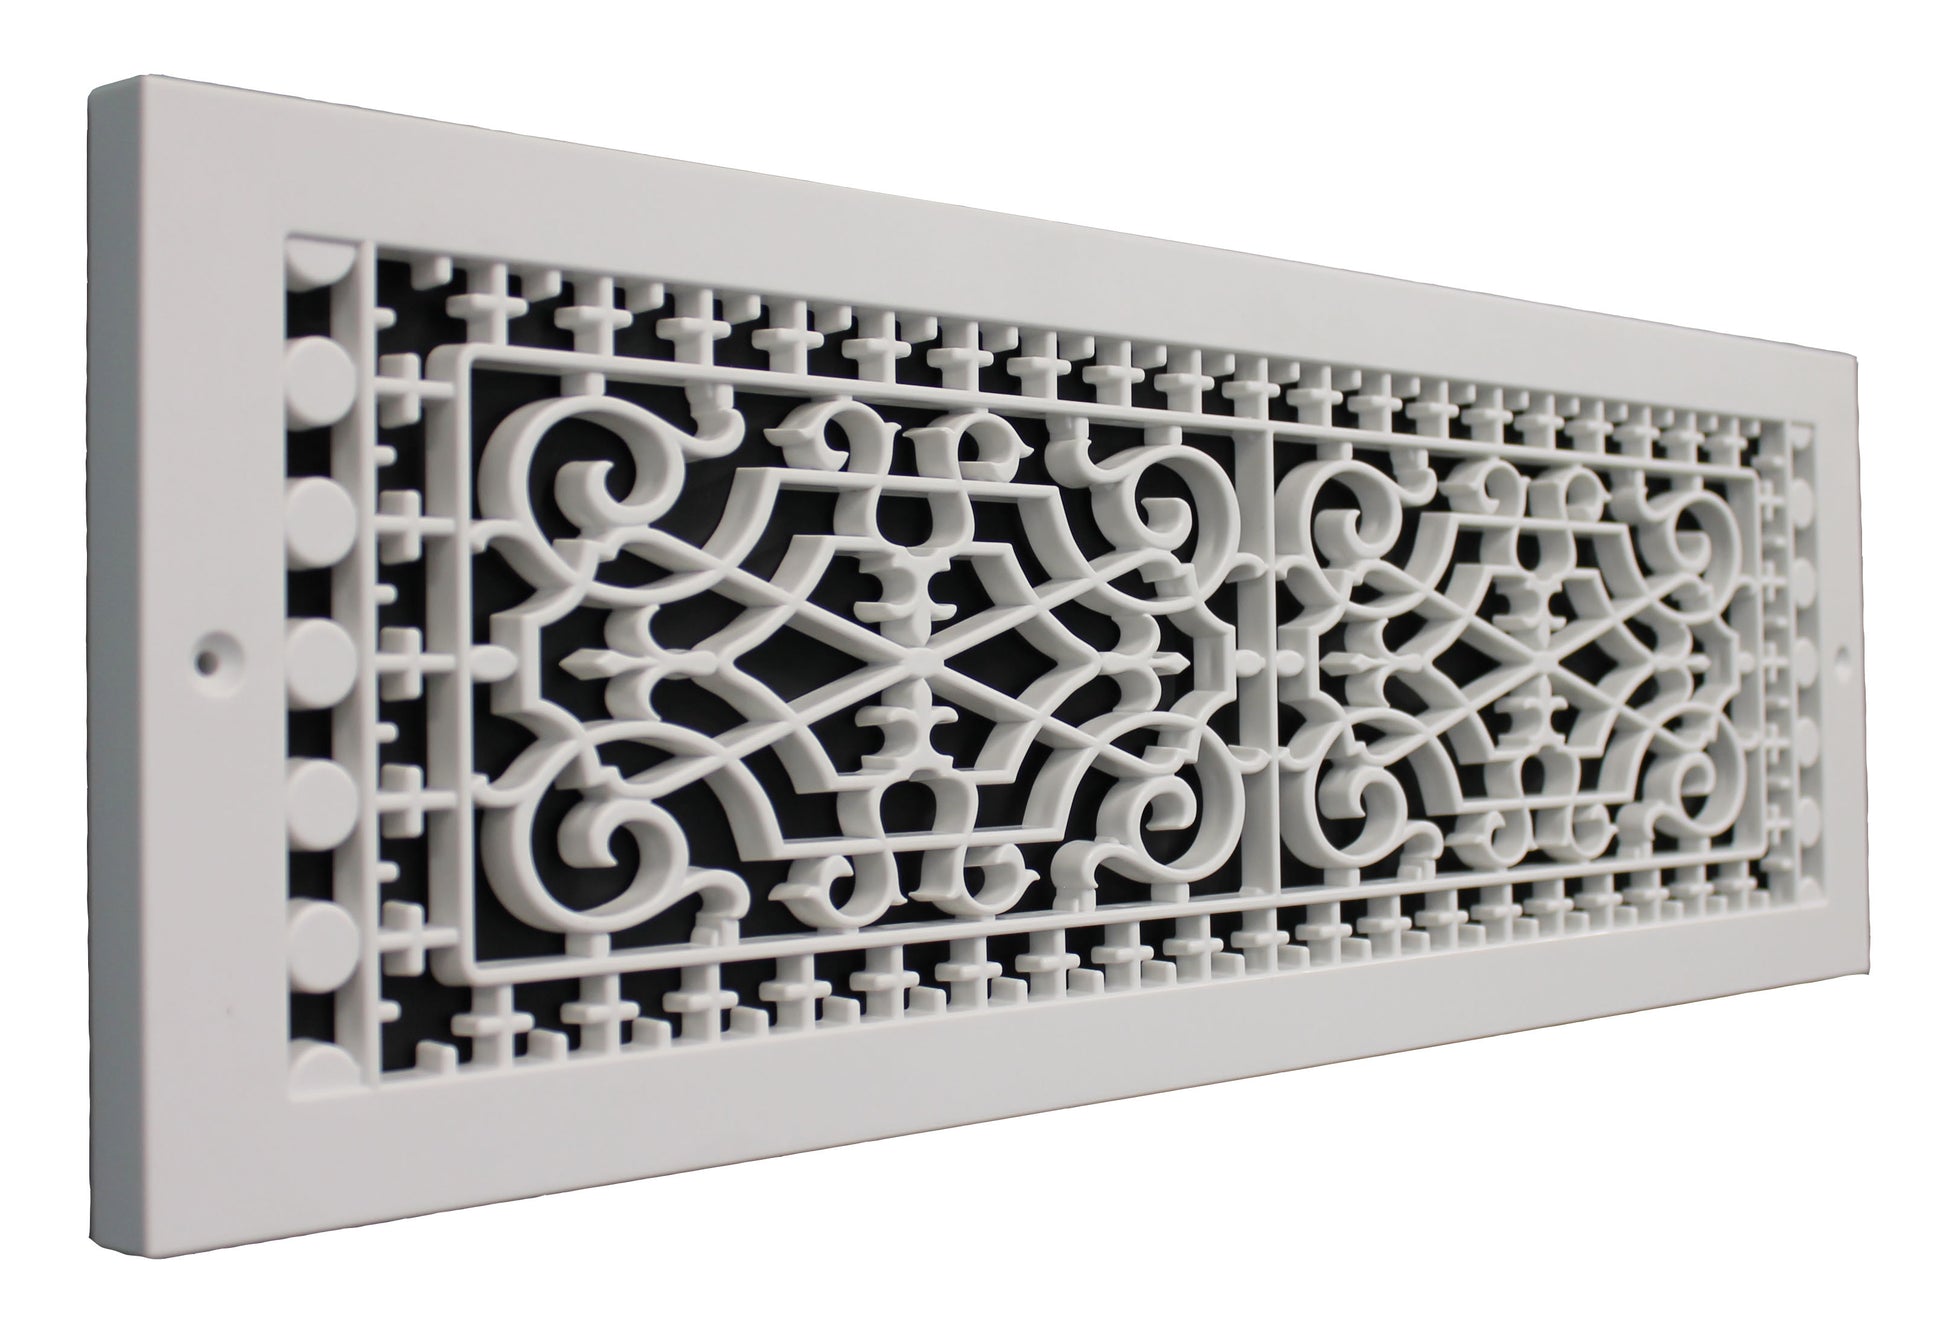 Victorian style decorative baseboard  vent cover with the dimensions 6" in x 22" in